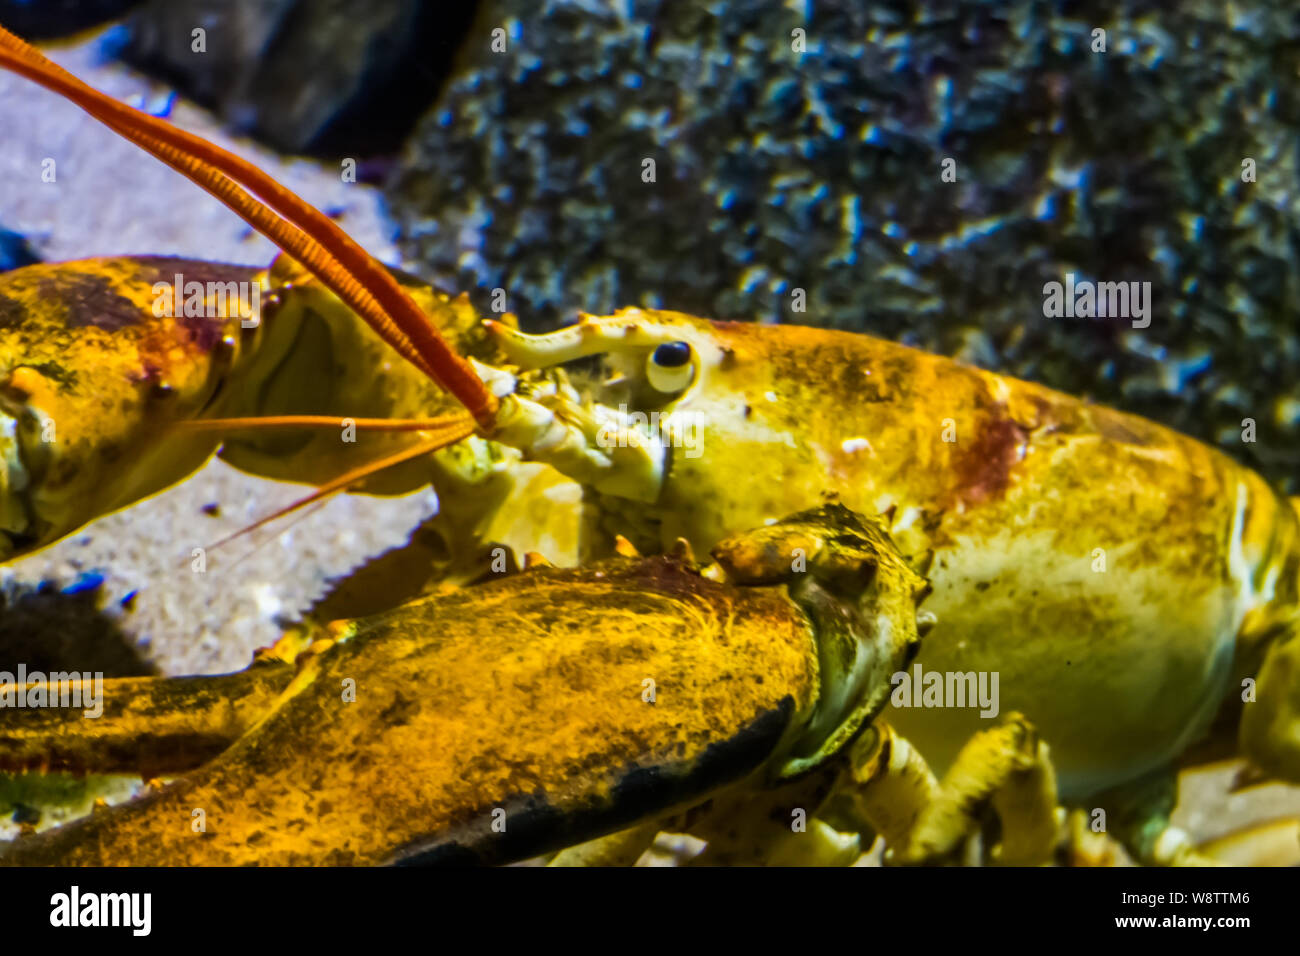 closeup of the face of a american lobster, tropical crustacean specie from the atlantic ocean Stock Photo